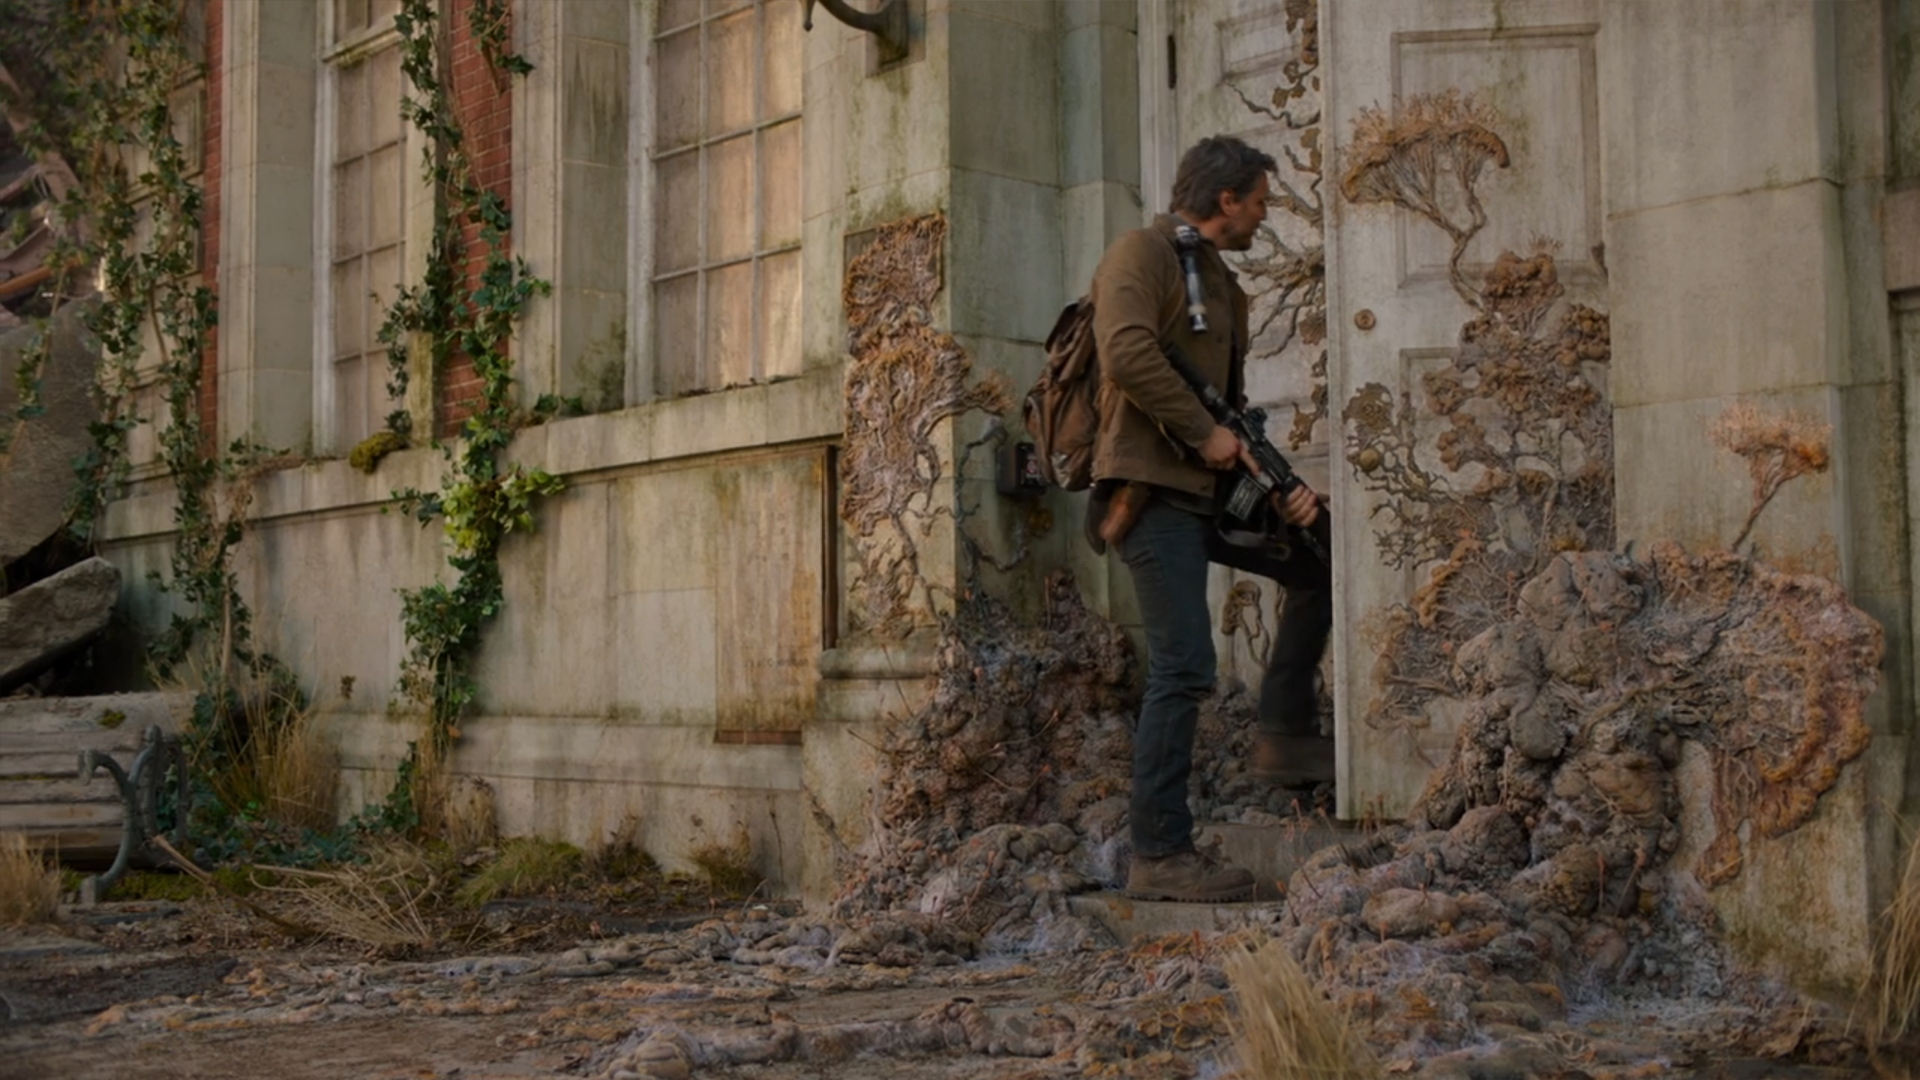 Last Of Us Episode 2's Connected Zombies Are Based In Real Science